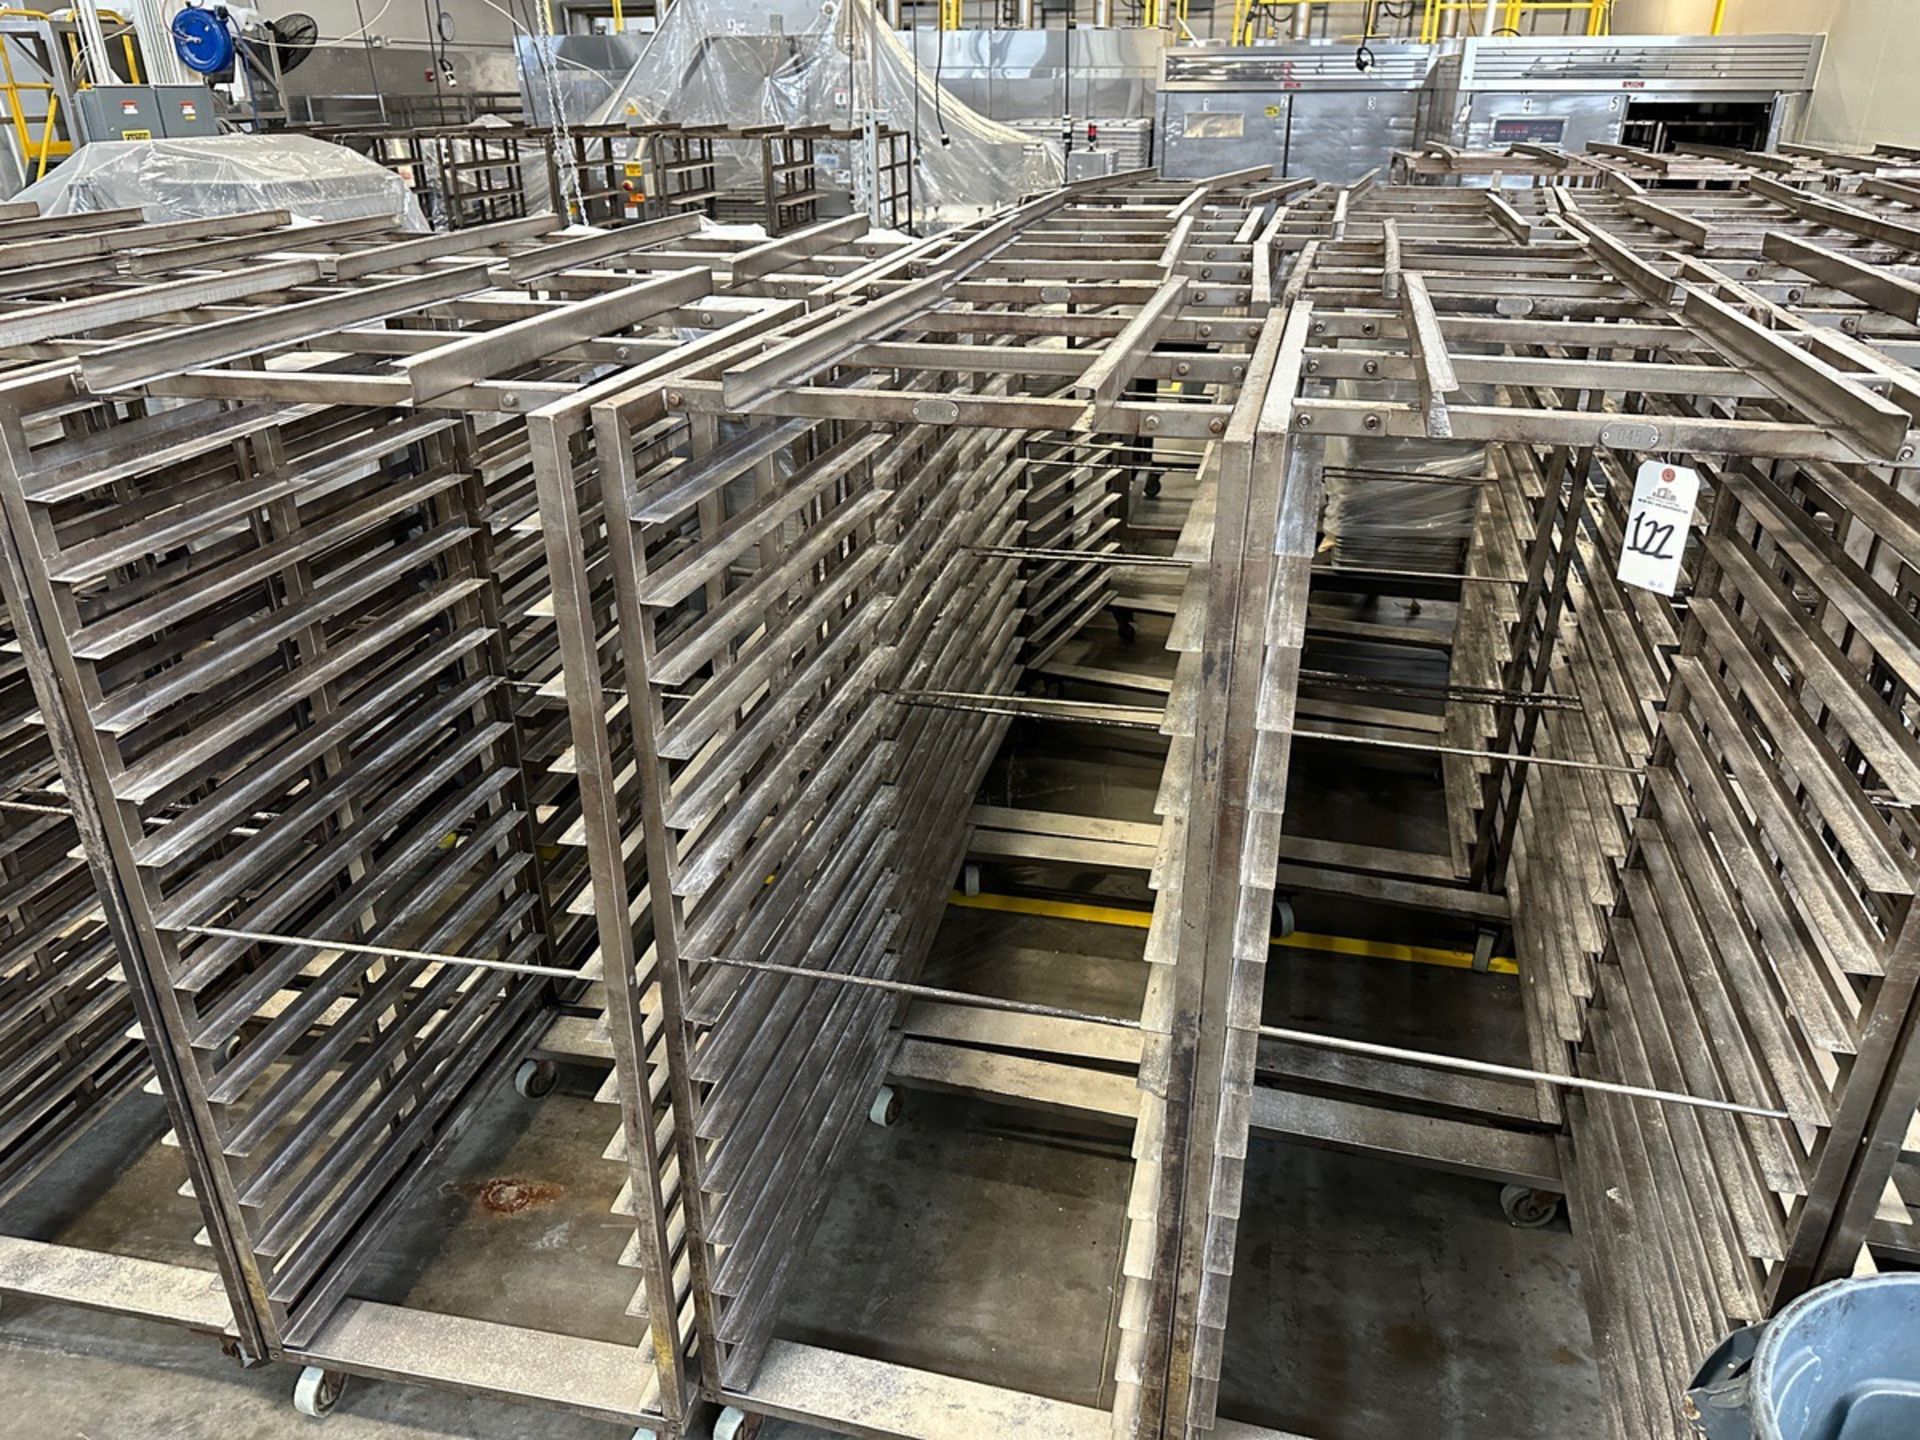 Lot of (10) Oven Racks (Approx. 29" x 3' x 68" O.H.) | Rig Fee $100